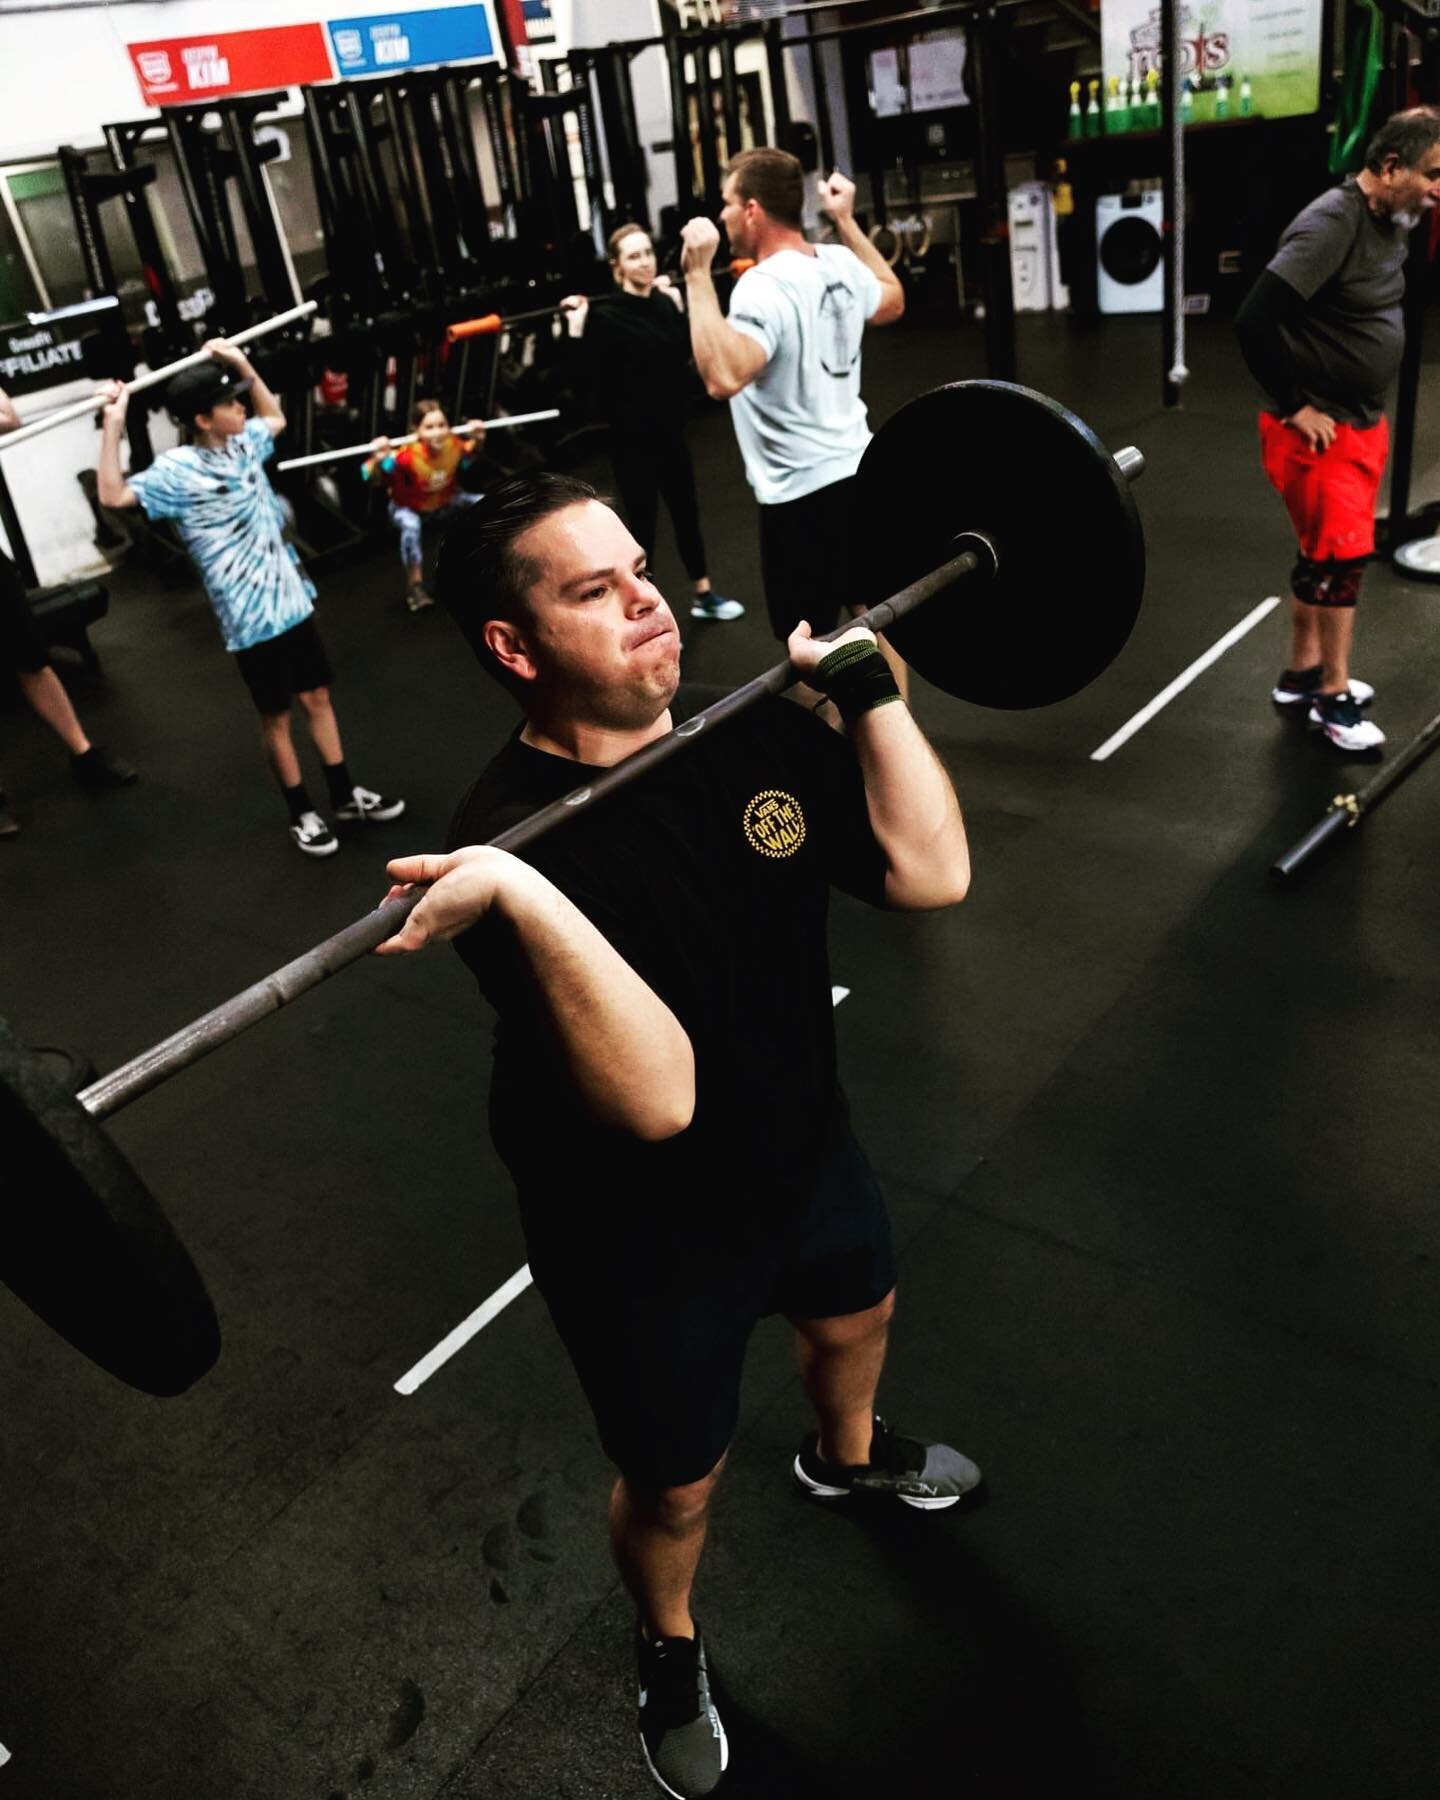 Wednesday
8/16/2023
&quot;STRENGTH
Every 2:00 x 12:00... (6 Sets)
2 Power Clean + 1 Power Jerk&quot;
WOD:
&quot;For Time:
24/18 - 16/12 - 8/6
Cal Bike
24 - 16 - 8
Toes to Bar&quot;

📸kevin_delfuego